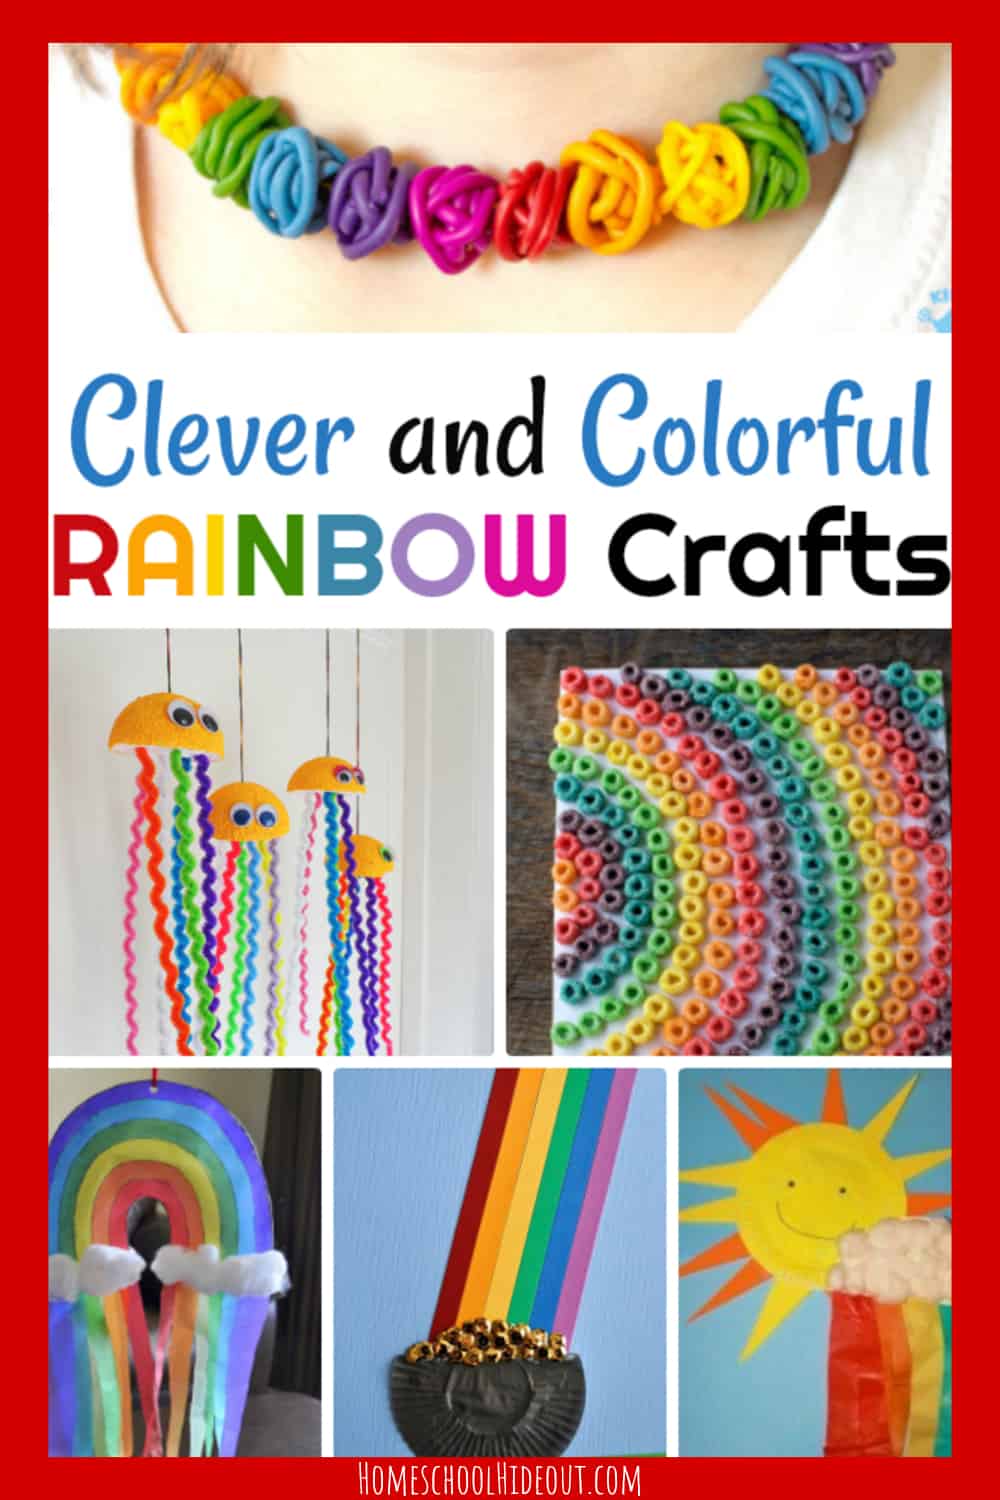 Love these rainbow crafts for kids. They'll make the most adorable keepsakes and are sure to inspire a smile!